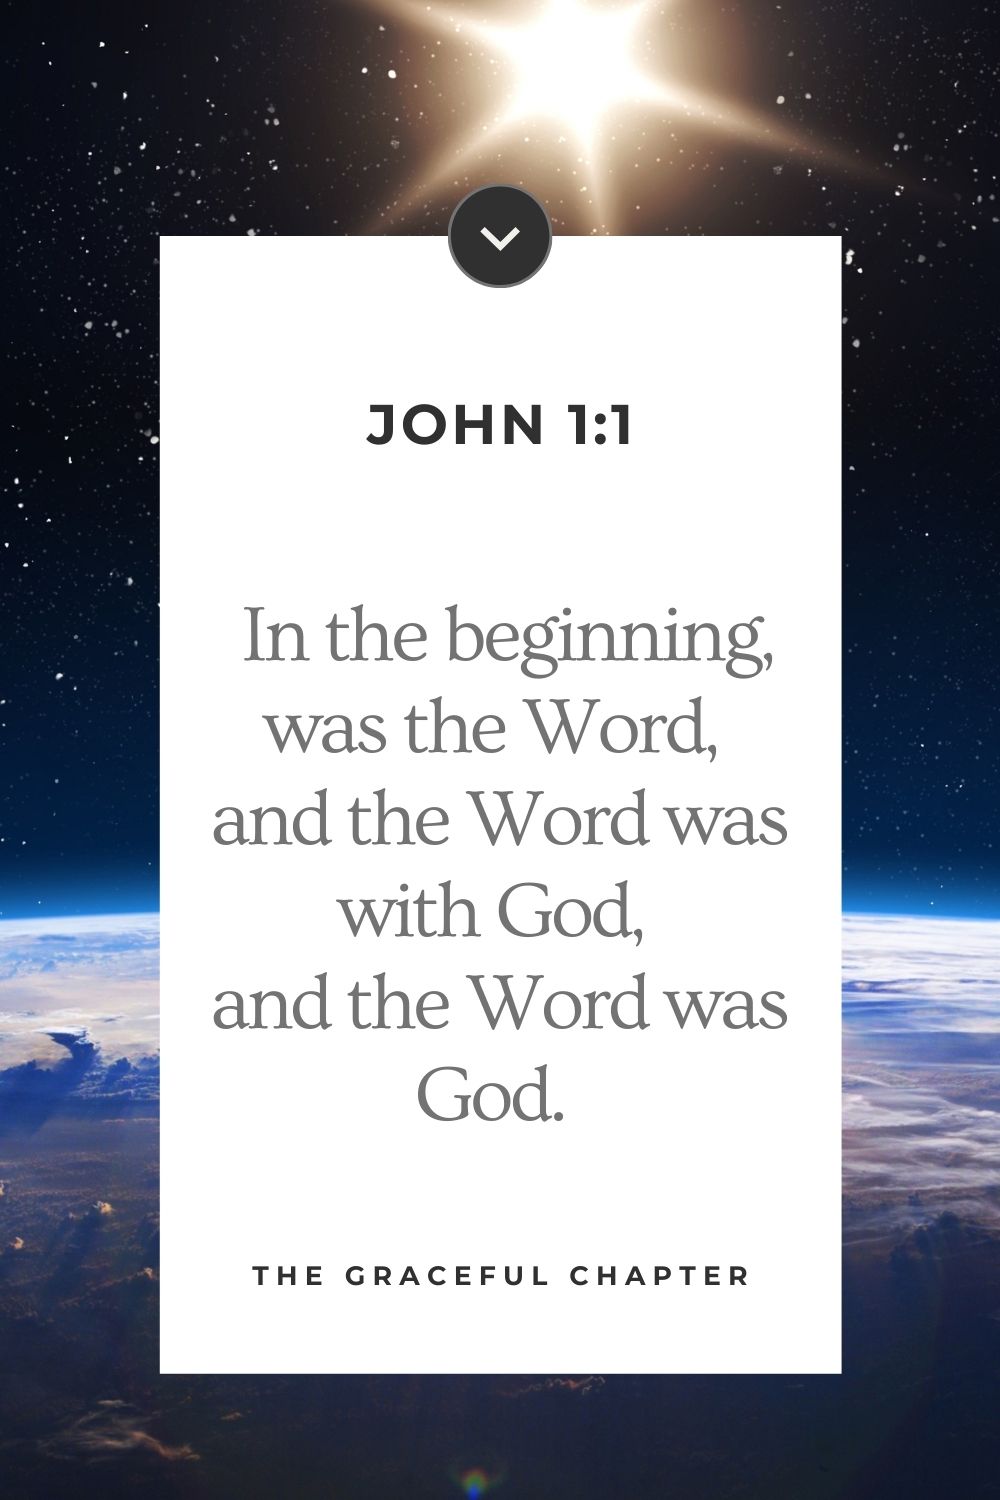  In the beginning, was the Word,  and the Word was with God,  and the Word was God. 